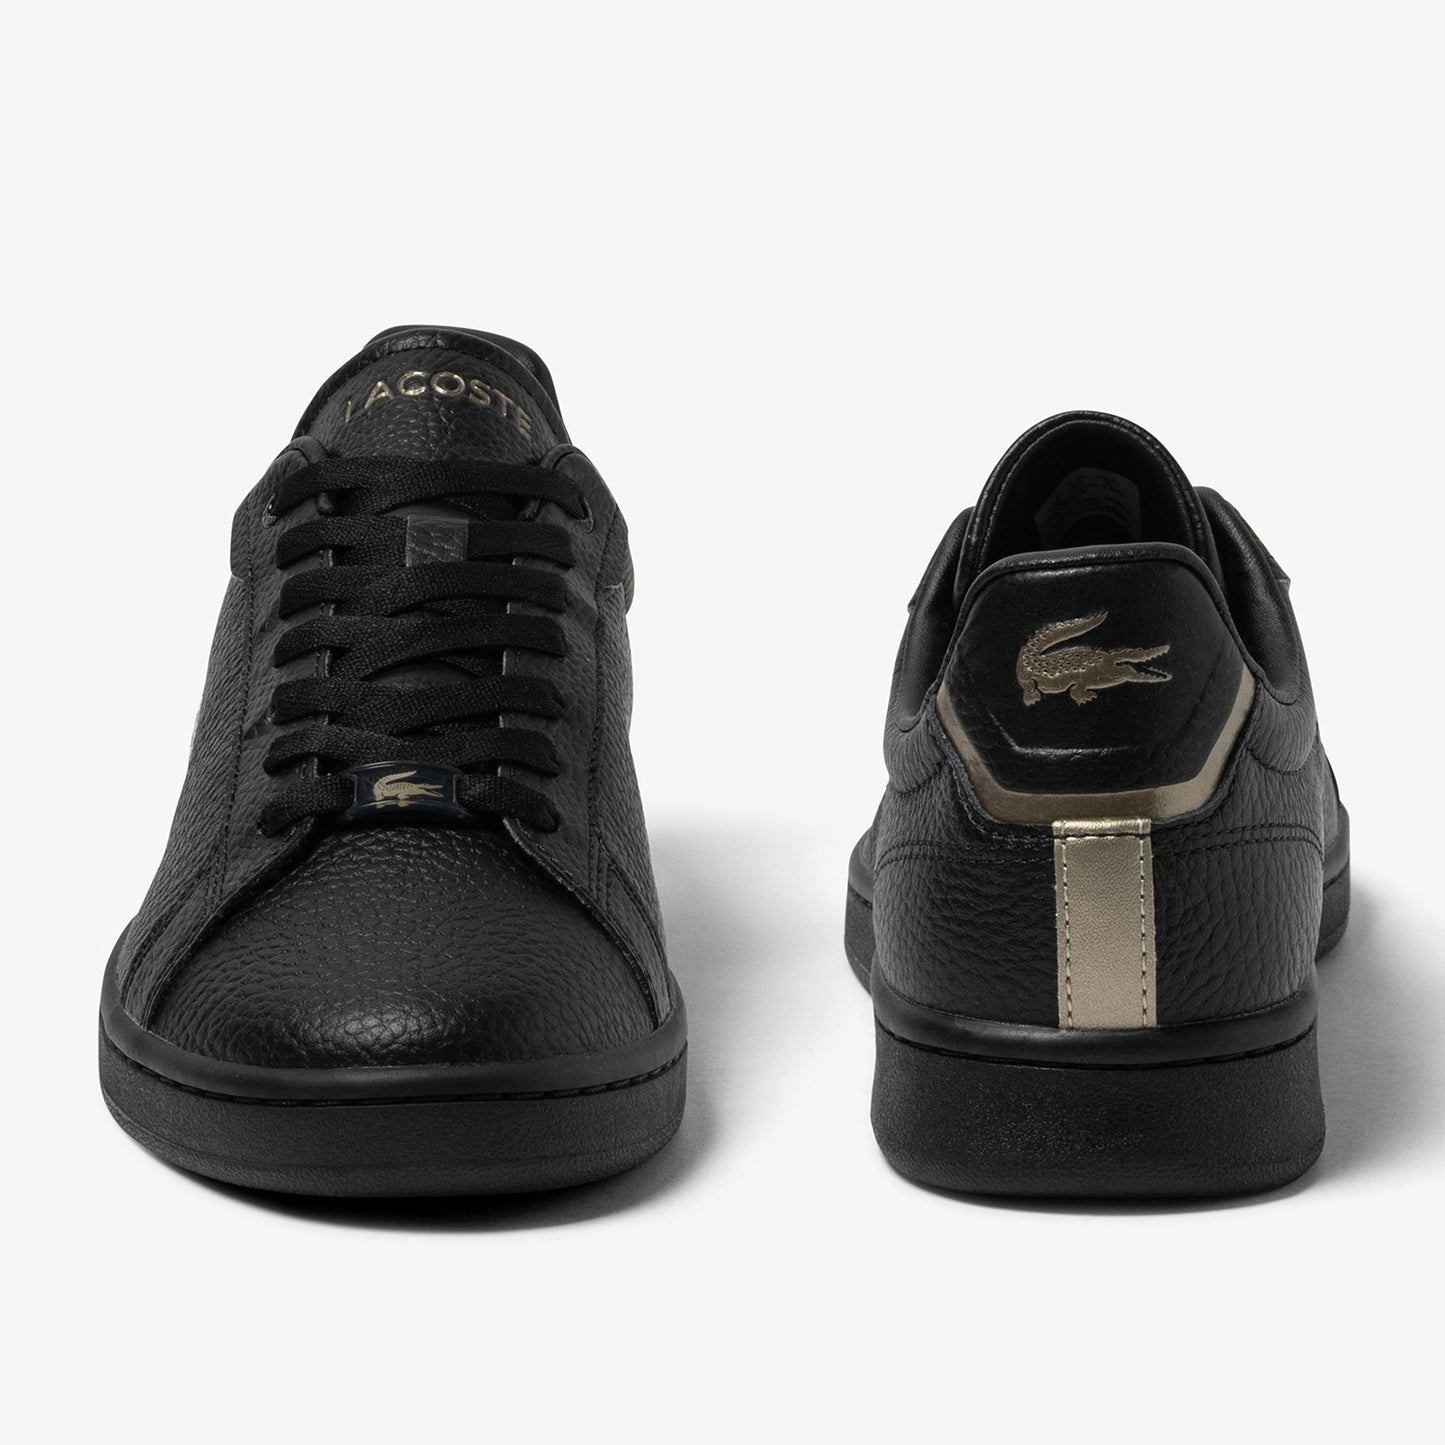 LACOSTE Men's Carnaby Pro Leather Sneakers - Black/Black